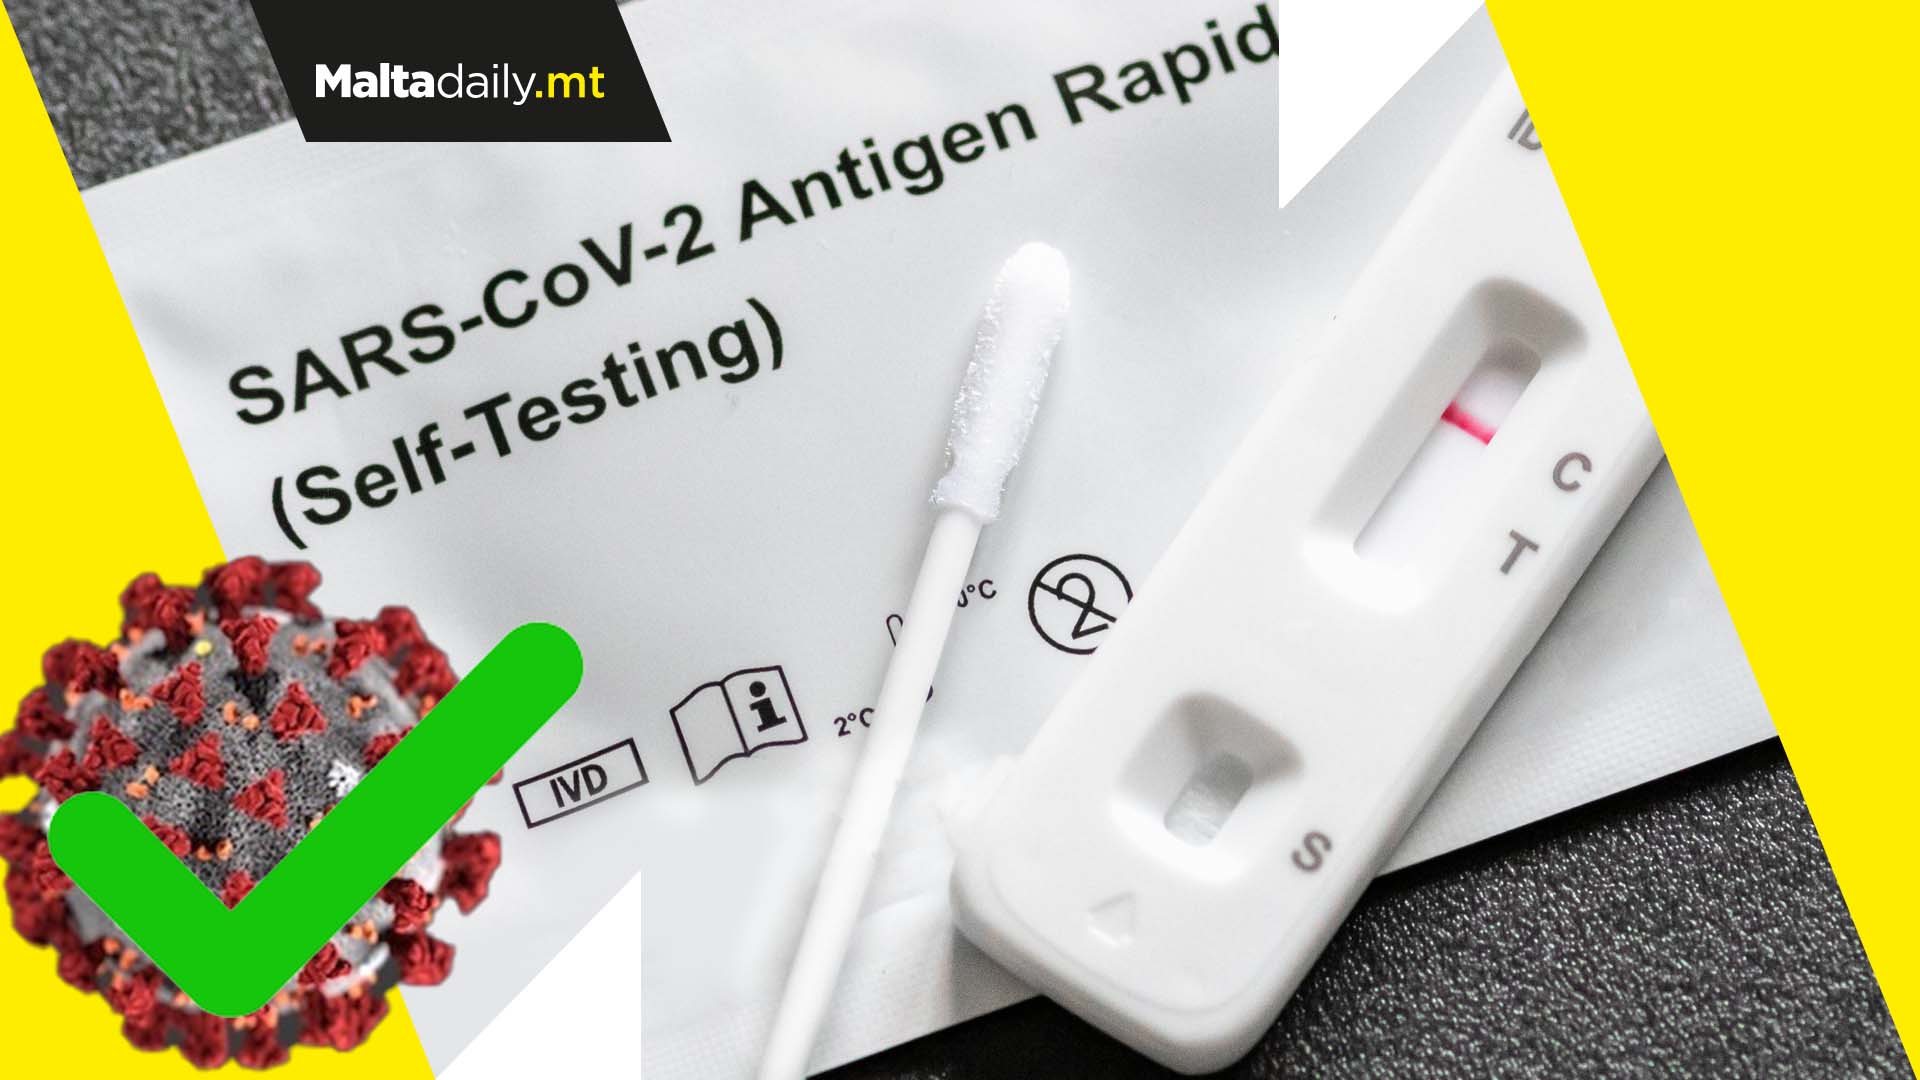 Five COVID-19 self-testing kits approved by Medicines Authority